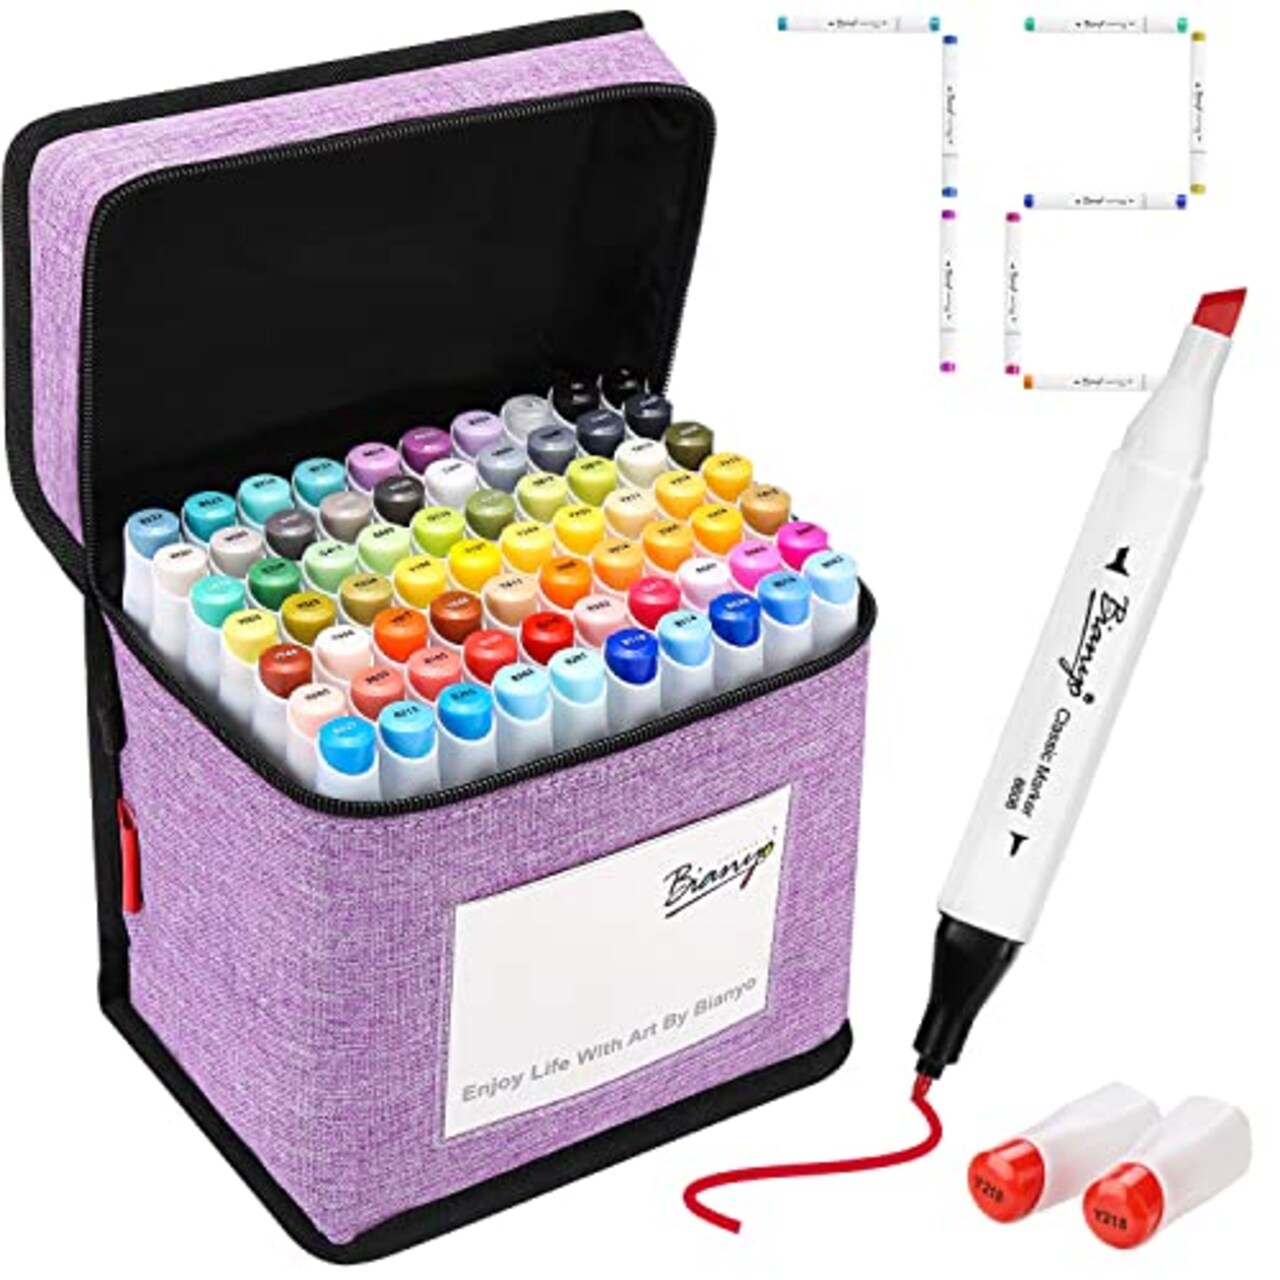 Bianyo 72 Primary Colors Alcohol Markers Set, Double Tipped Bullet & Chisel  Art Marker Set for Coloring, Drawing, Sketching, 71 Classic Colors+1  Blender+1 Swatch+1 Purple Travel Case